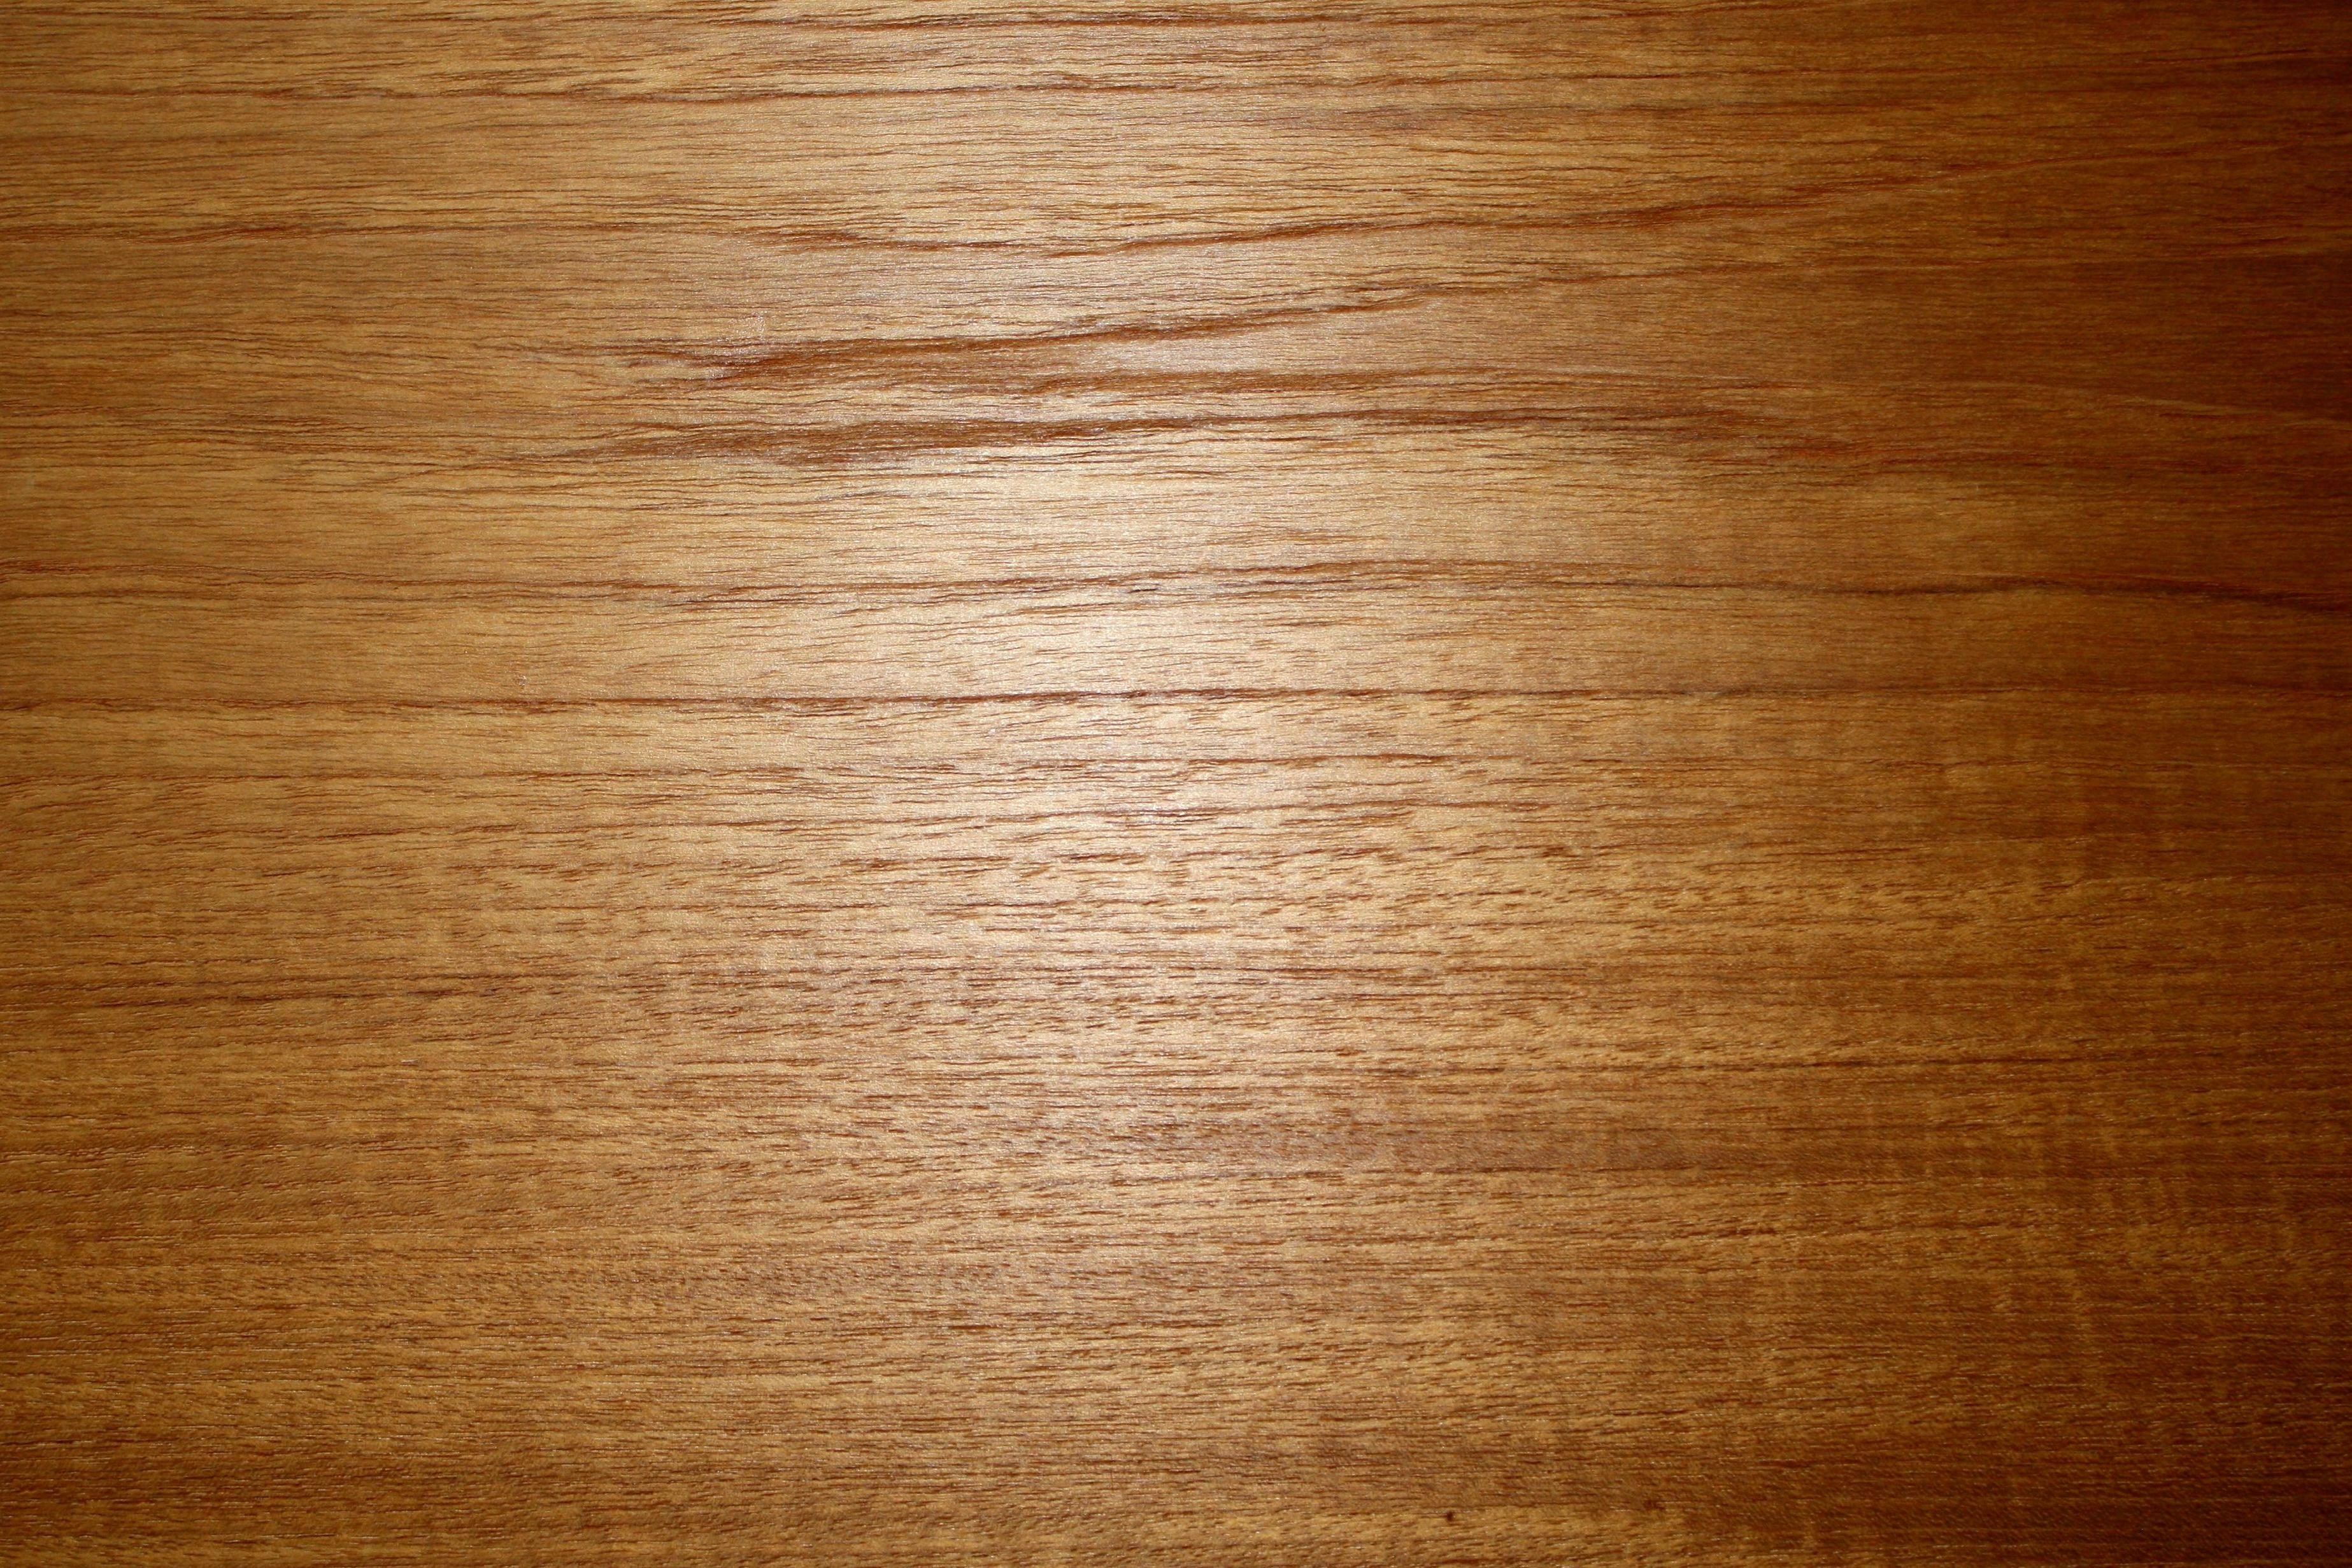 Free picture: wooden board, grain, texture, brown plank